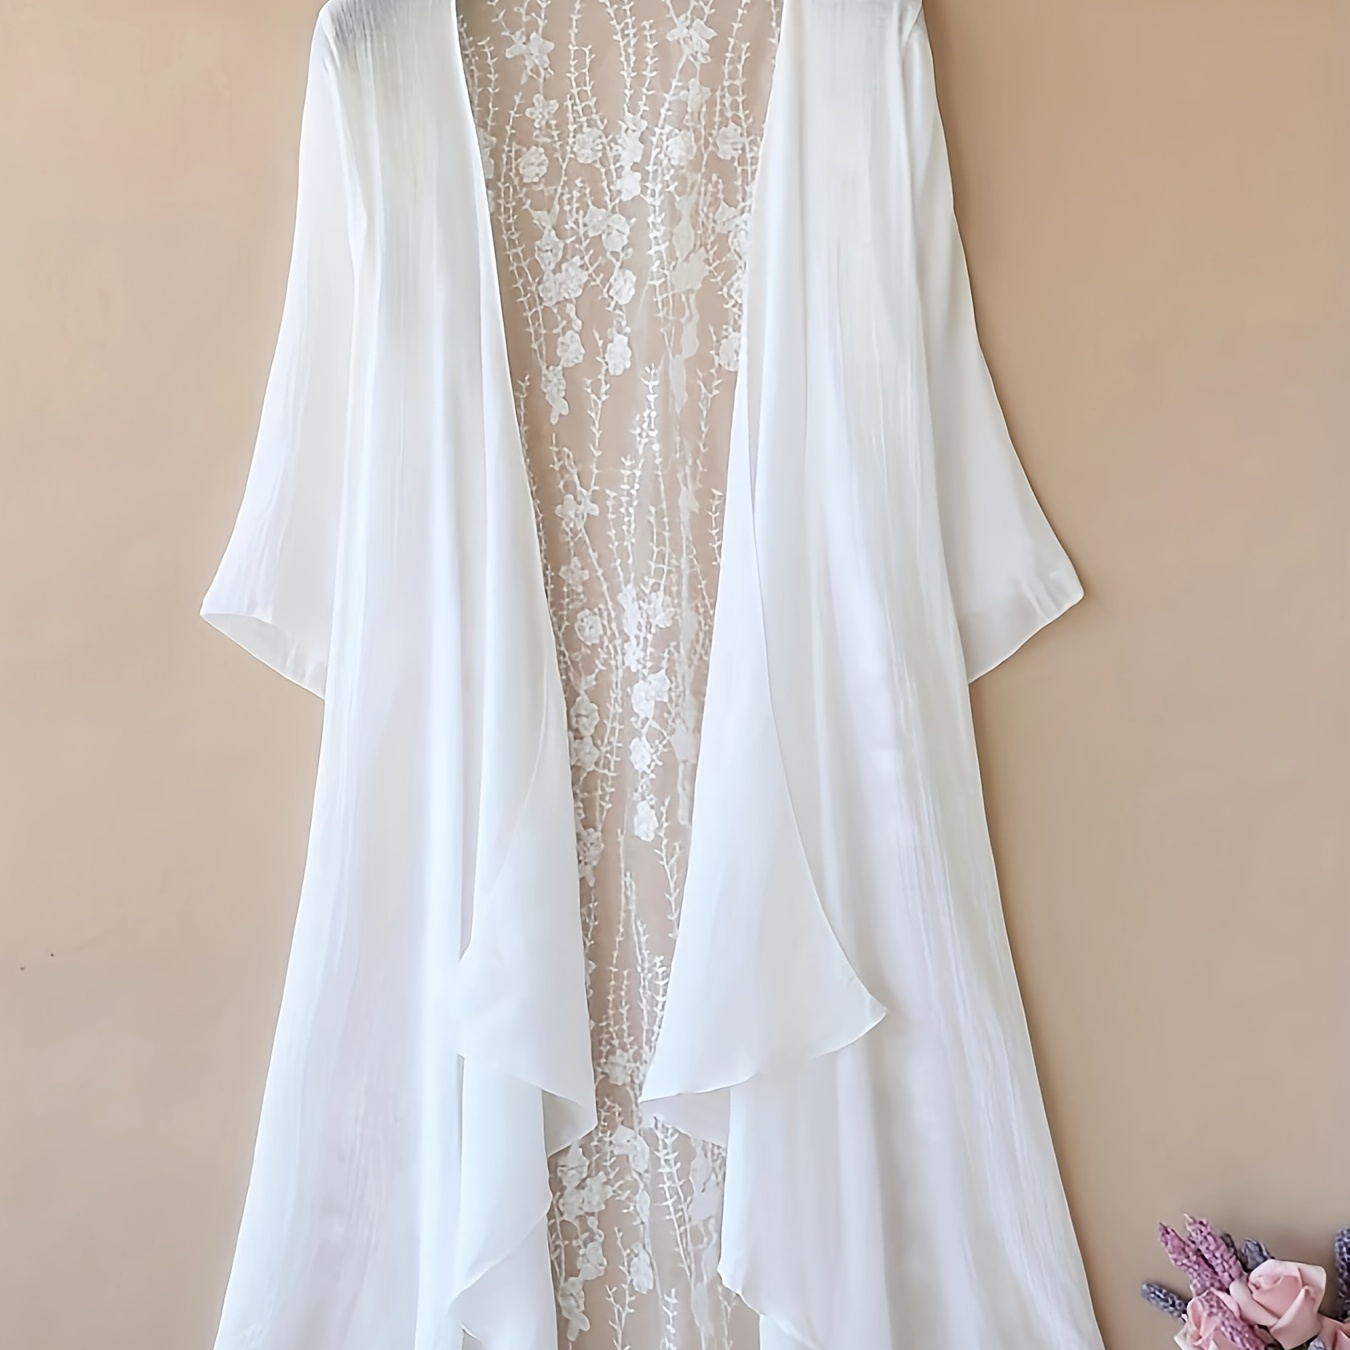 

Plus Size Elegant Kimono, Women's Floral Pattern Embroidery Semi Sheer Plain Half Sleeve Open Front Beach Cover Up